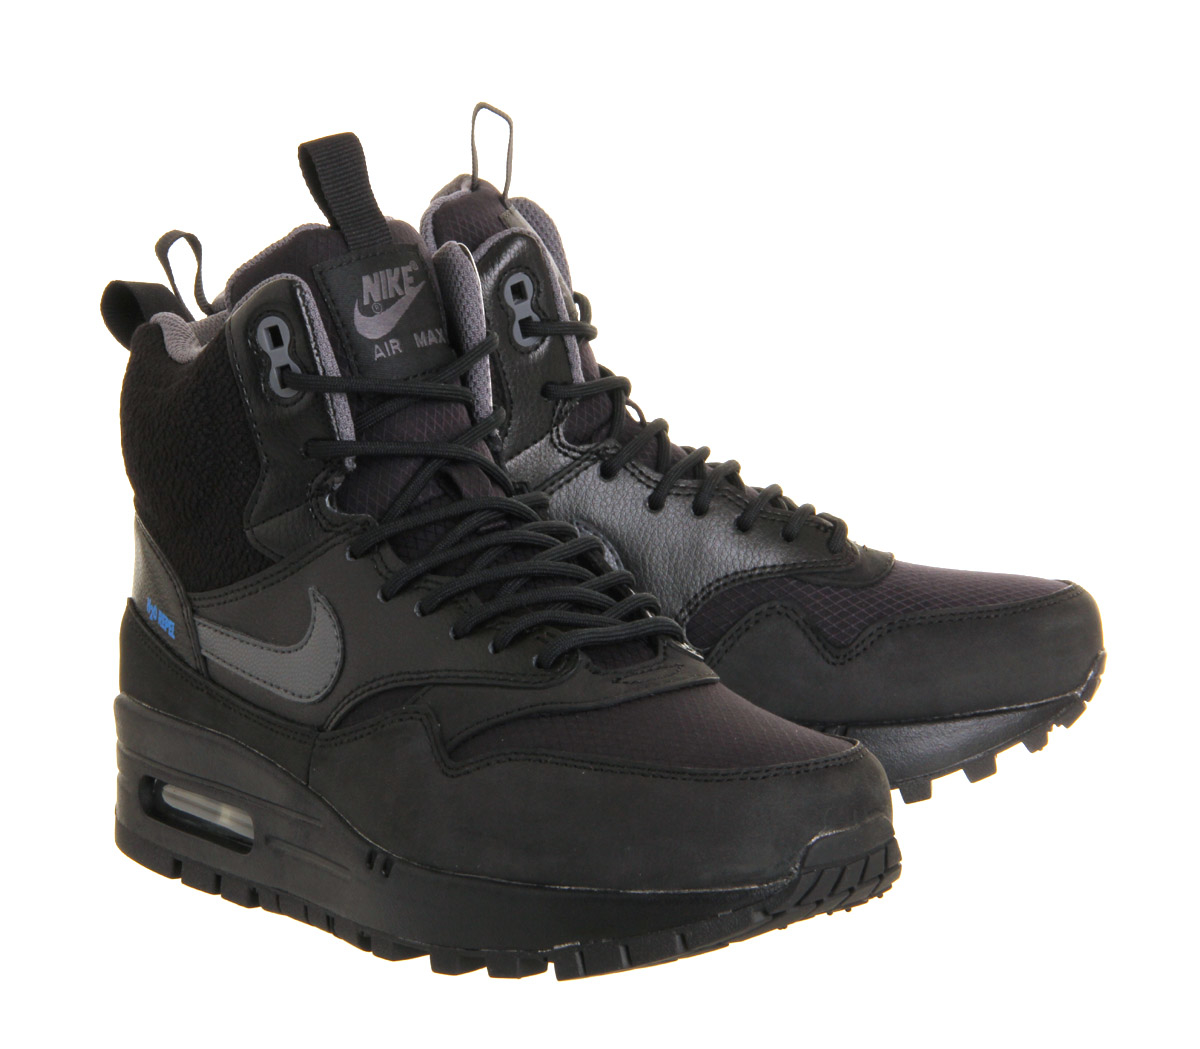 Nike Air Max 1 Mid Sneakerboots Wmns in 